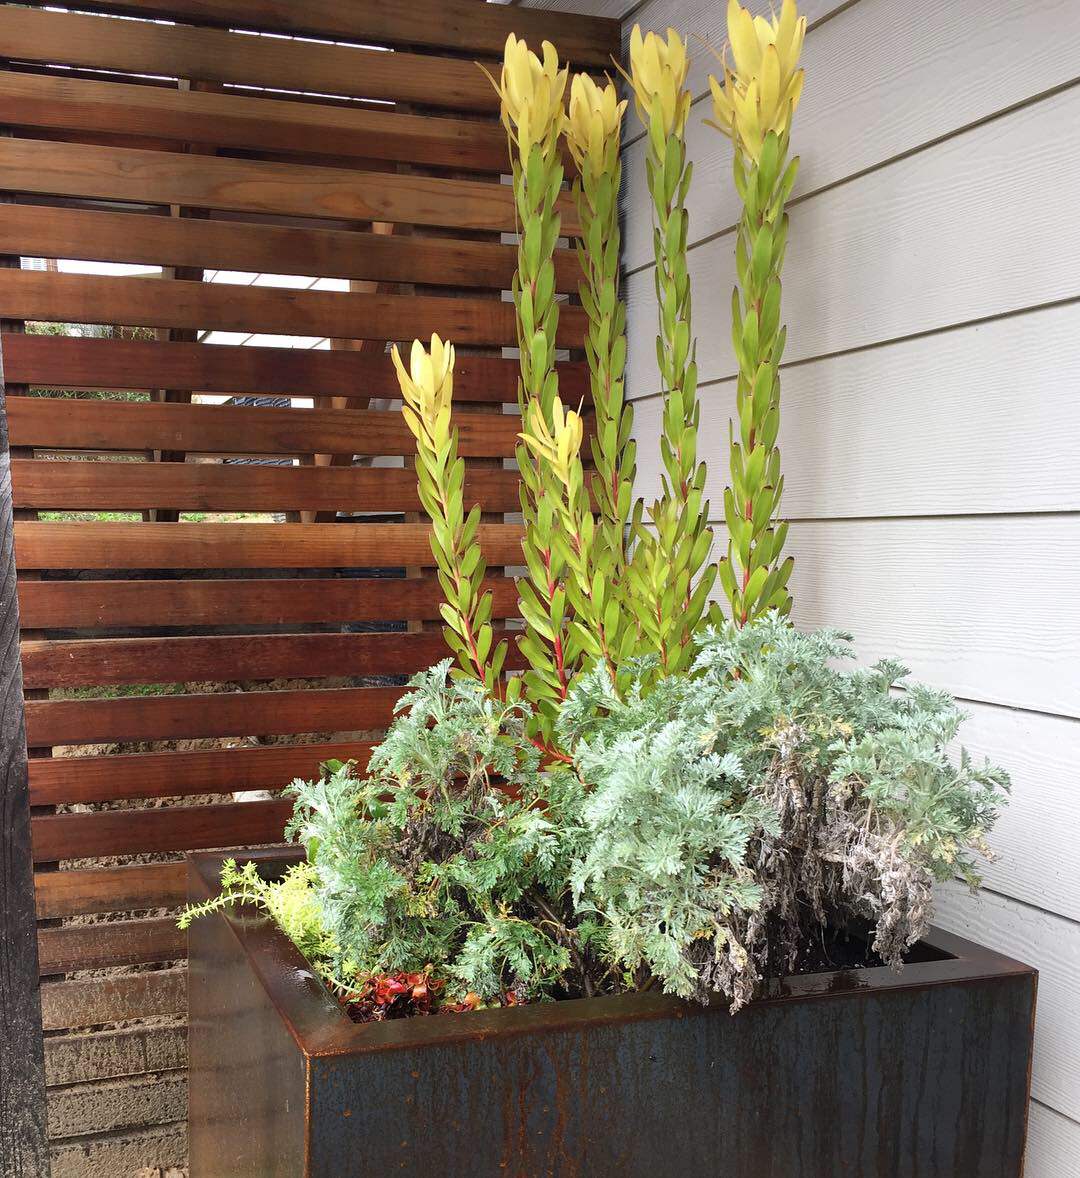 Corten steel planters by Veradek are awesome! A nice price and well made. They rust to a beautiful, varied patina that along with the straight lines of the steel creates a nice mix of organic and geom